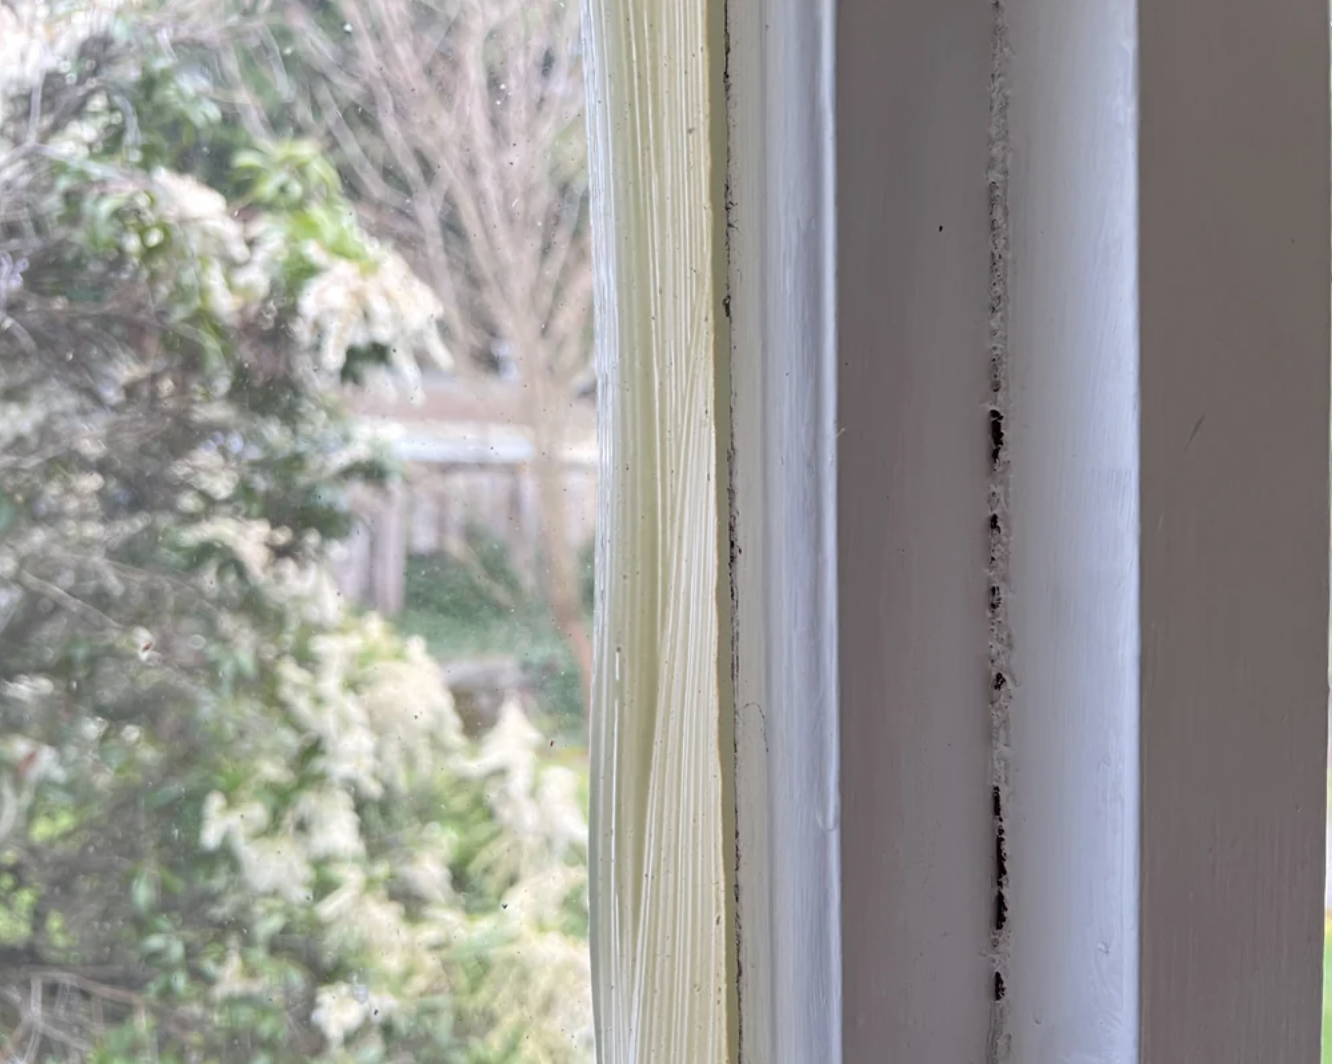 Close-up of window frame showing signs of wear and potential mold growth with blurry garden backdrop